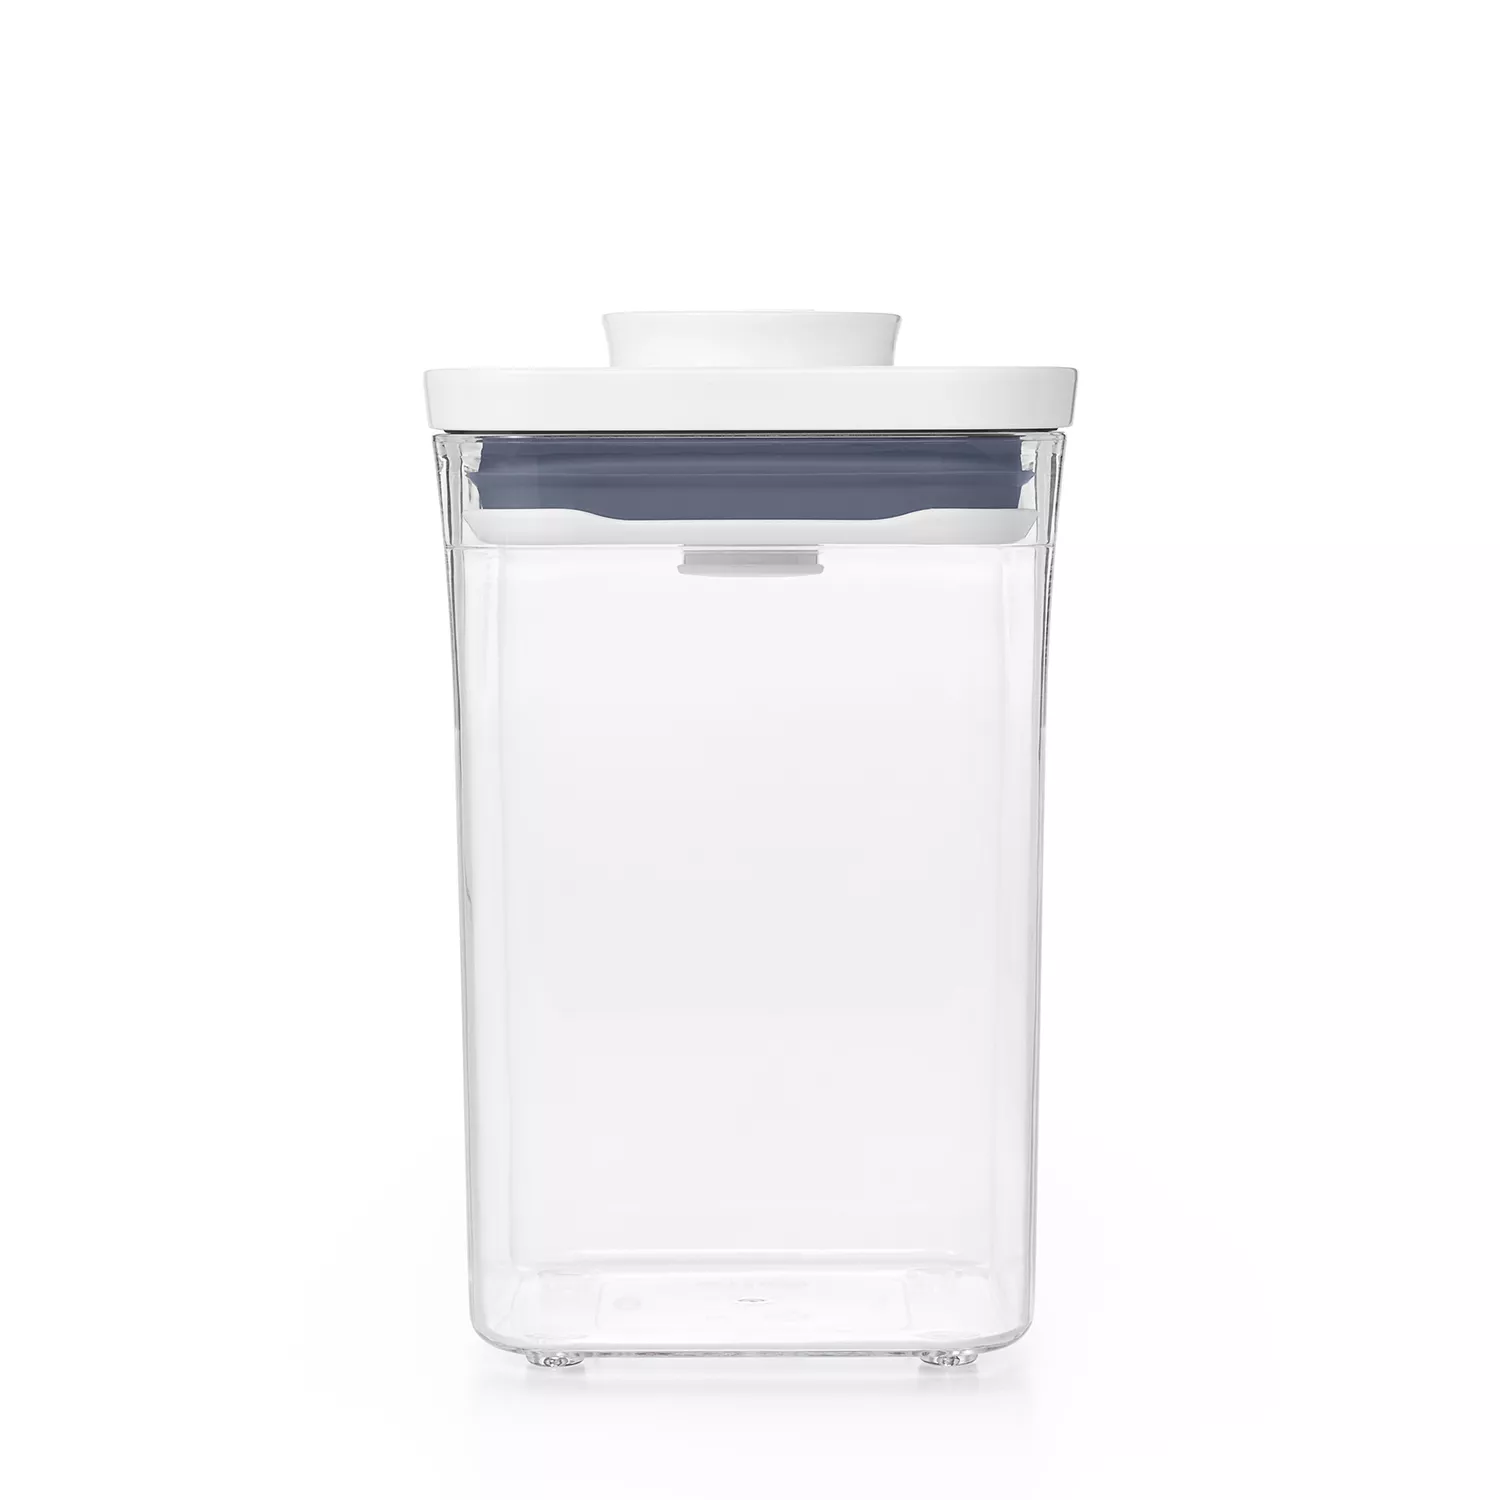 OXO Good Grips New POP Container, Small Square Short, 1.1 qt.